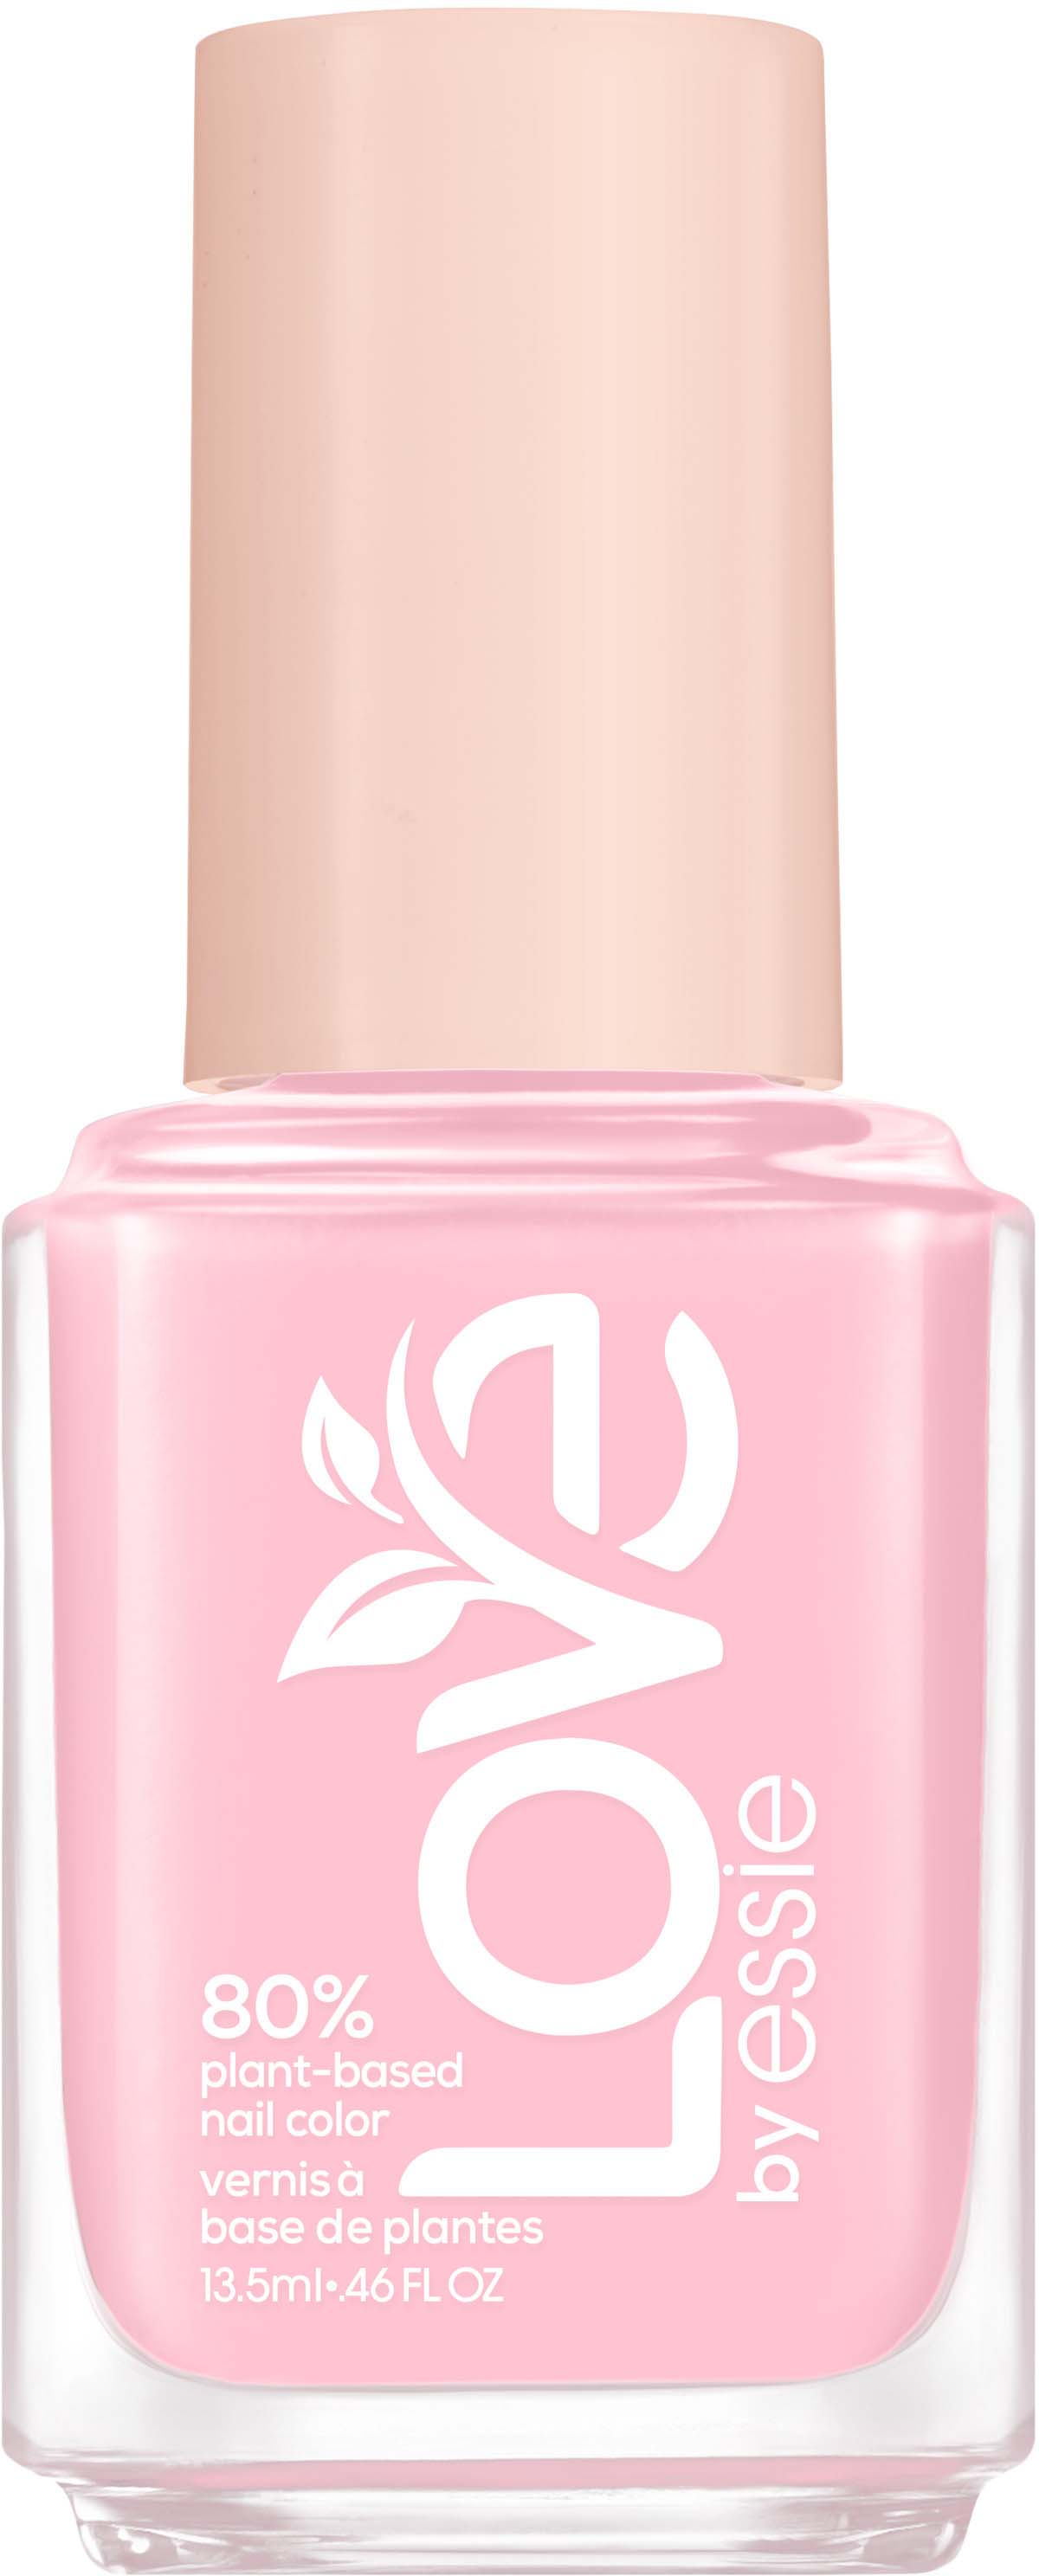 LOVE Plant-based by Essie Essie 130 Make Move The 80% Nail Color